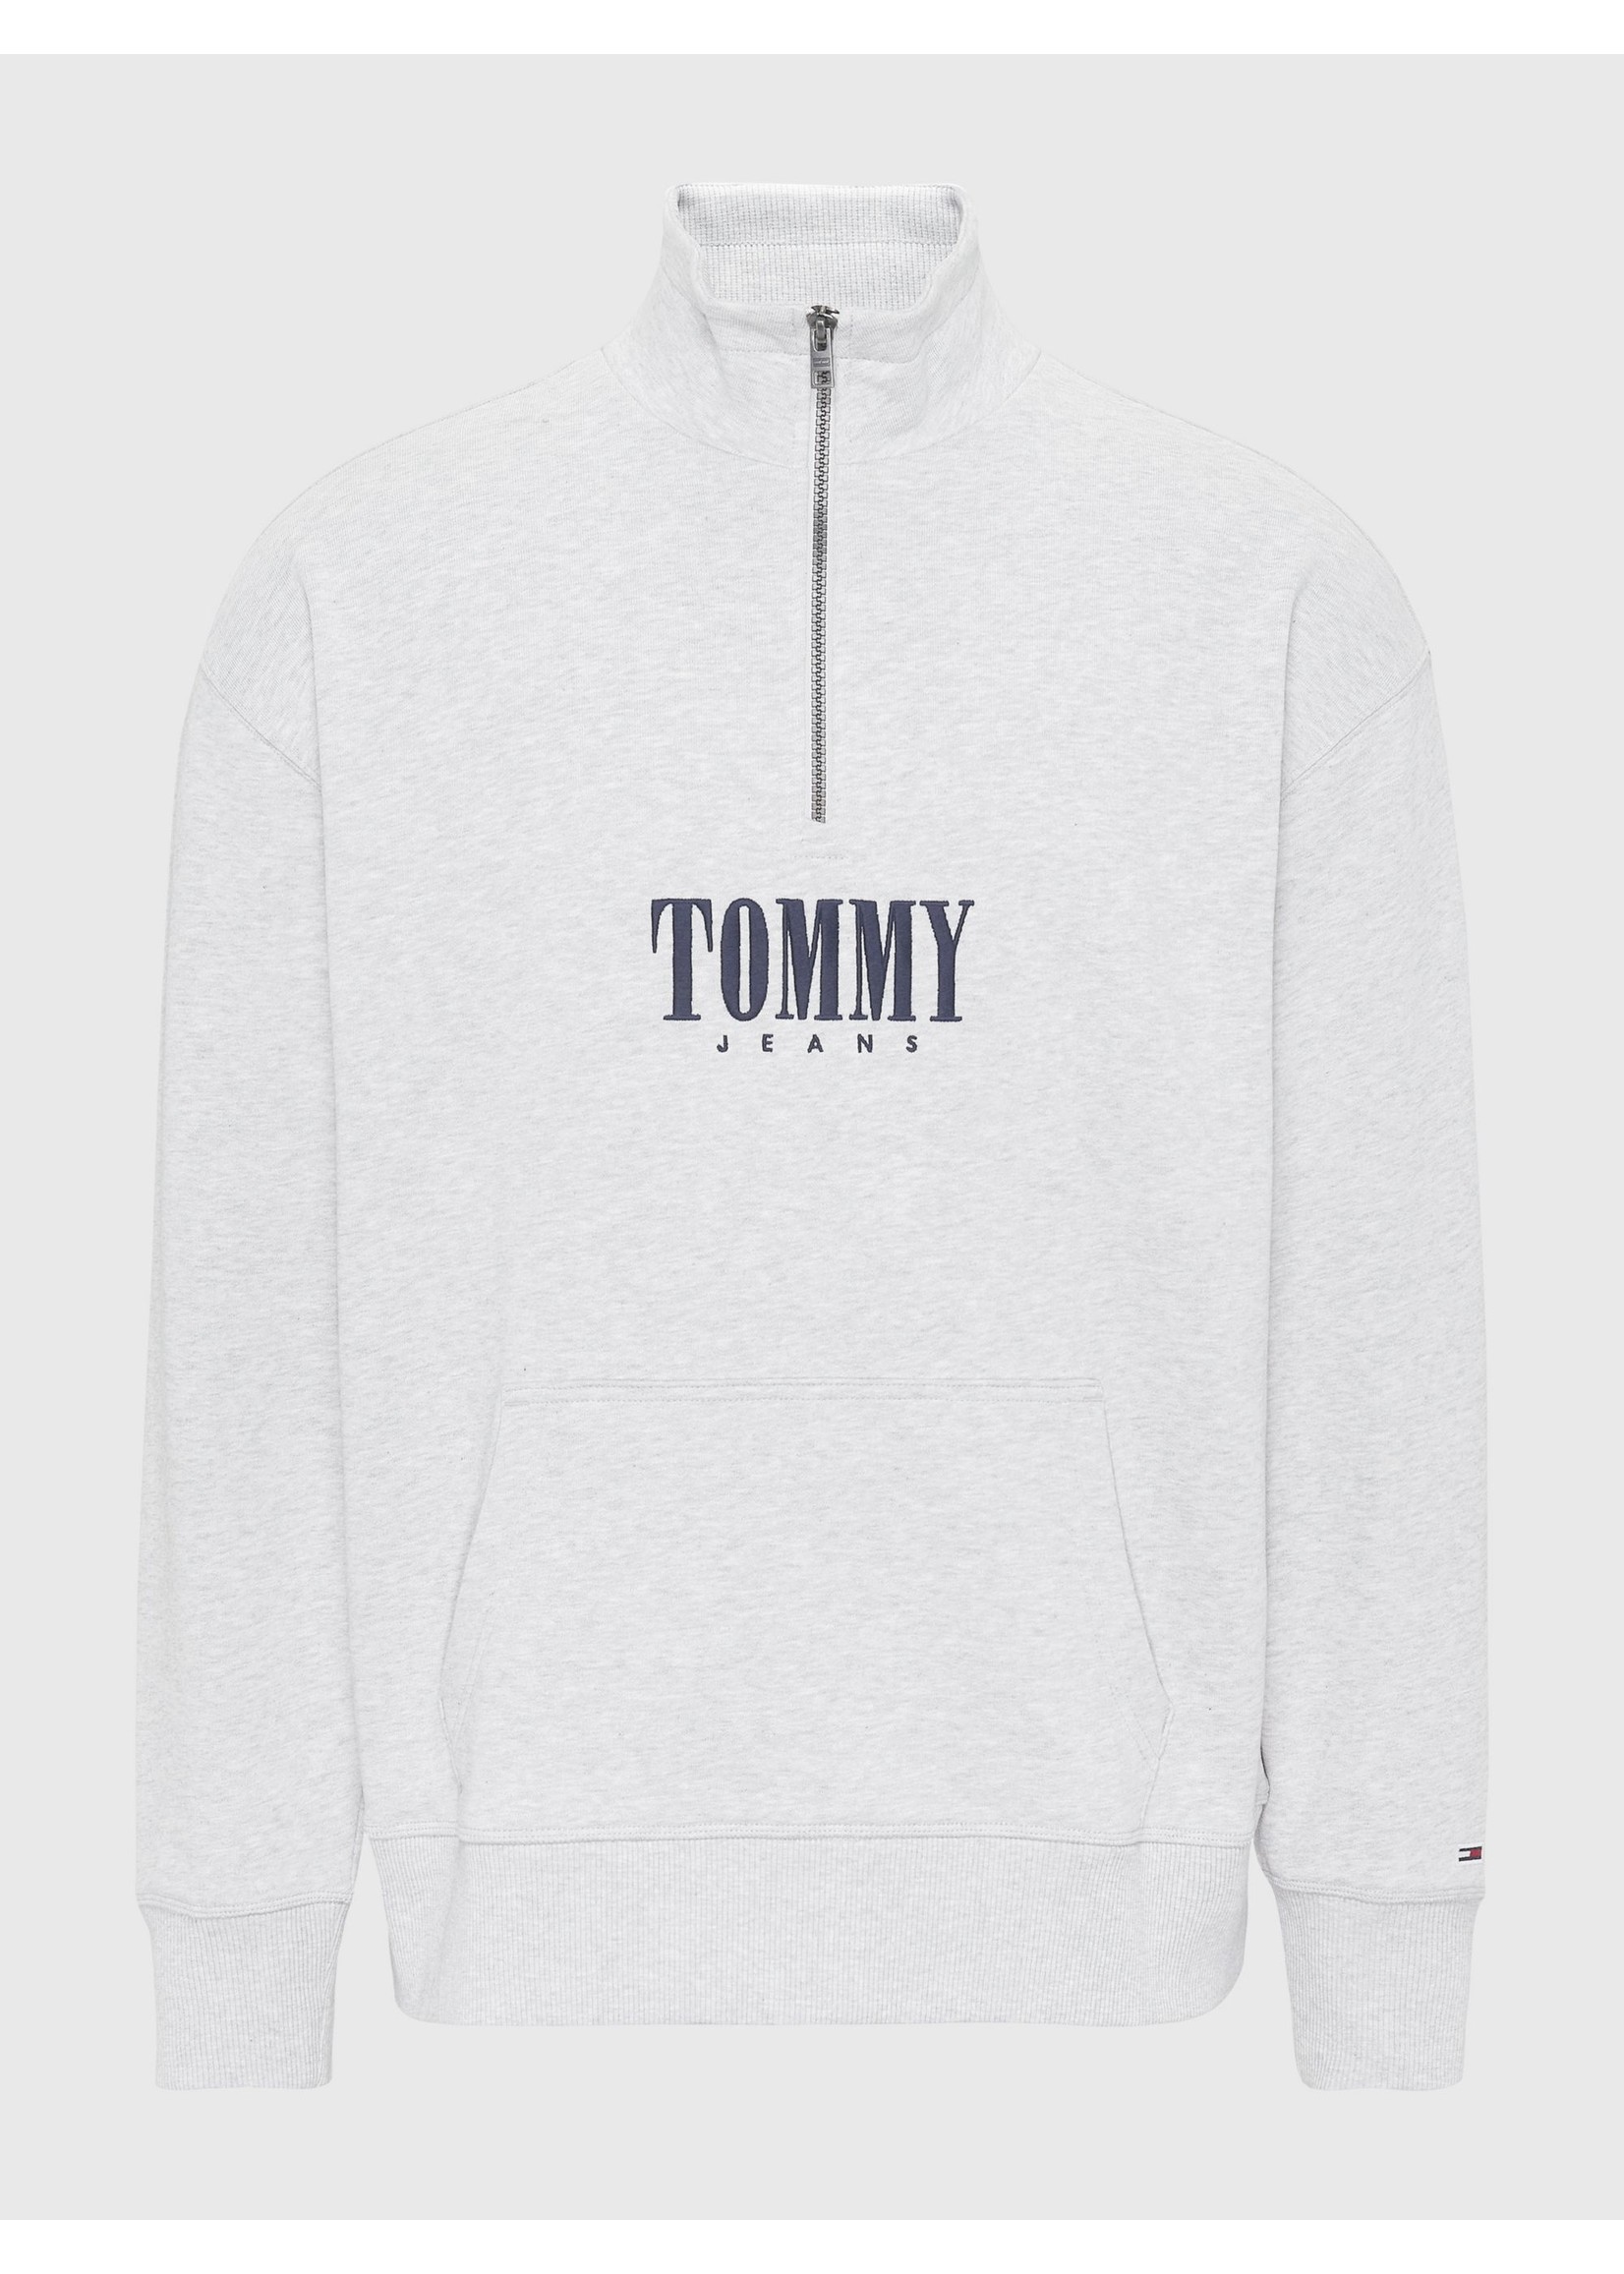 Tommy Jeans Authentic Half Zip Sweater -  Silver Grey Htr